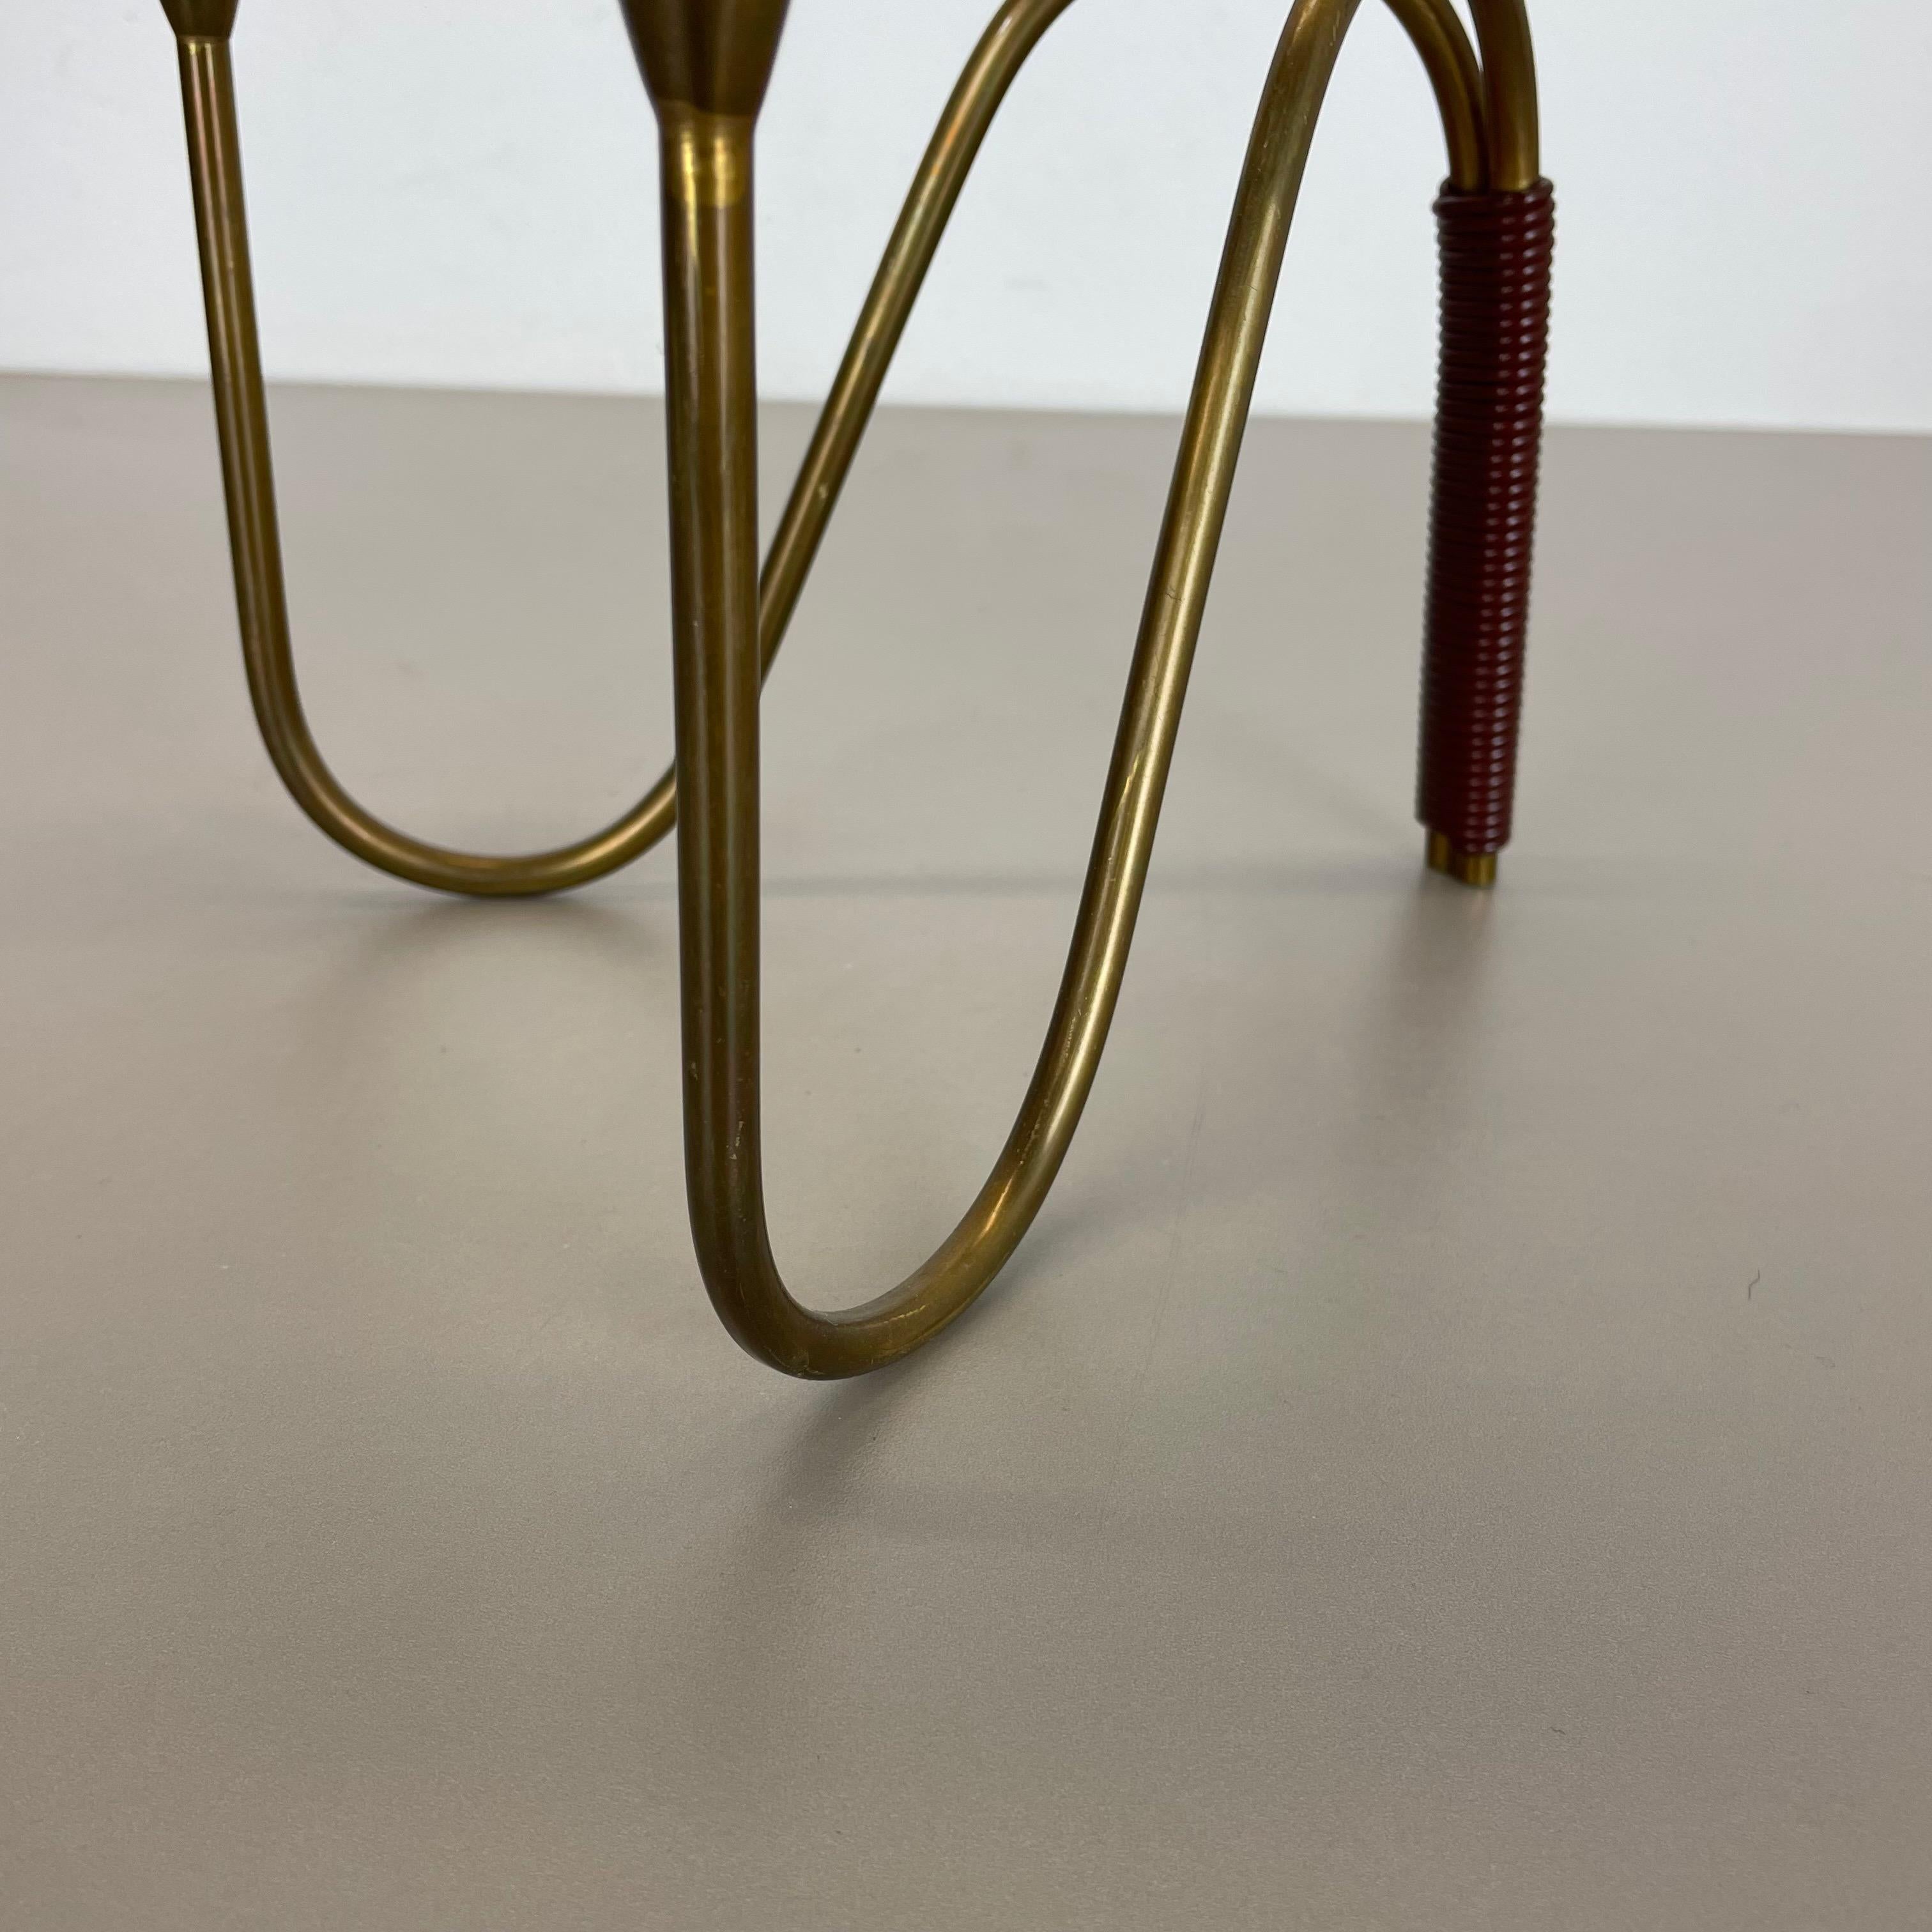 20th Century Sculptural Brass Candleholder Object by Günter Kupetz for WMF, Germany 1950s For Sale